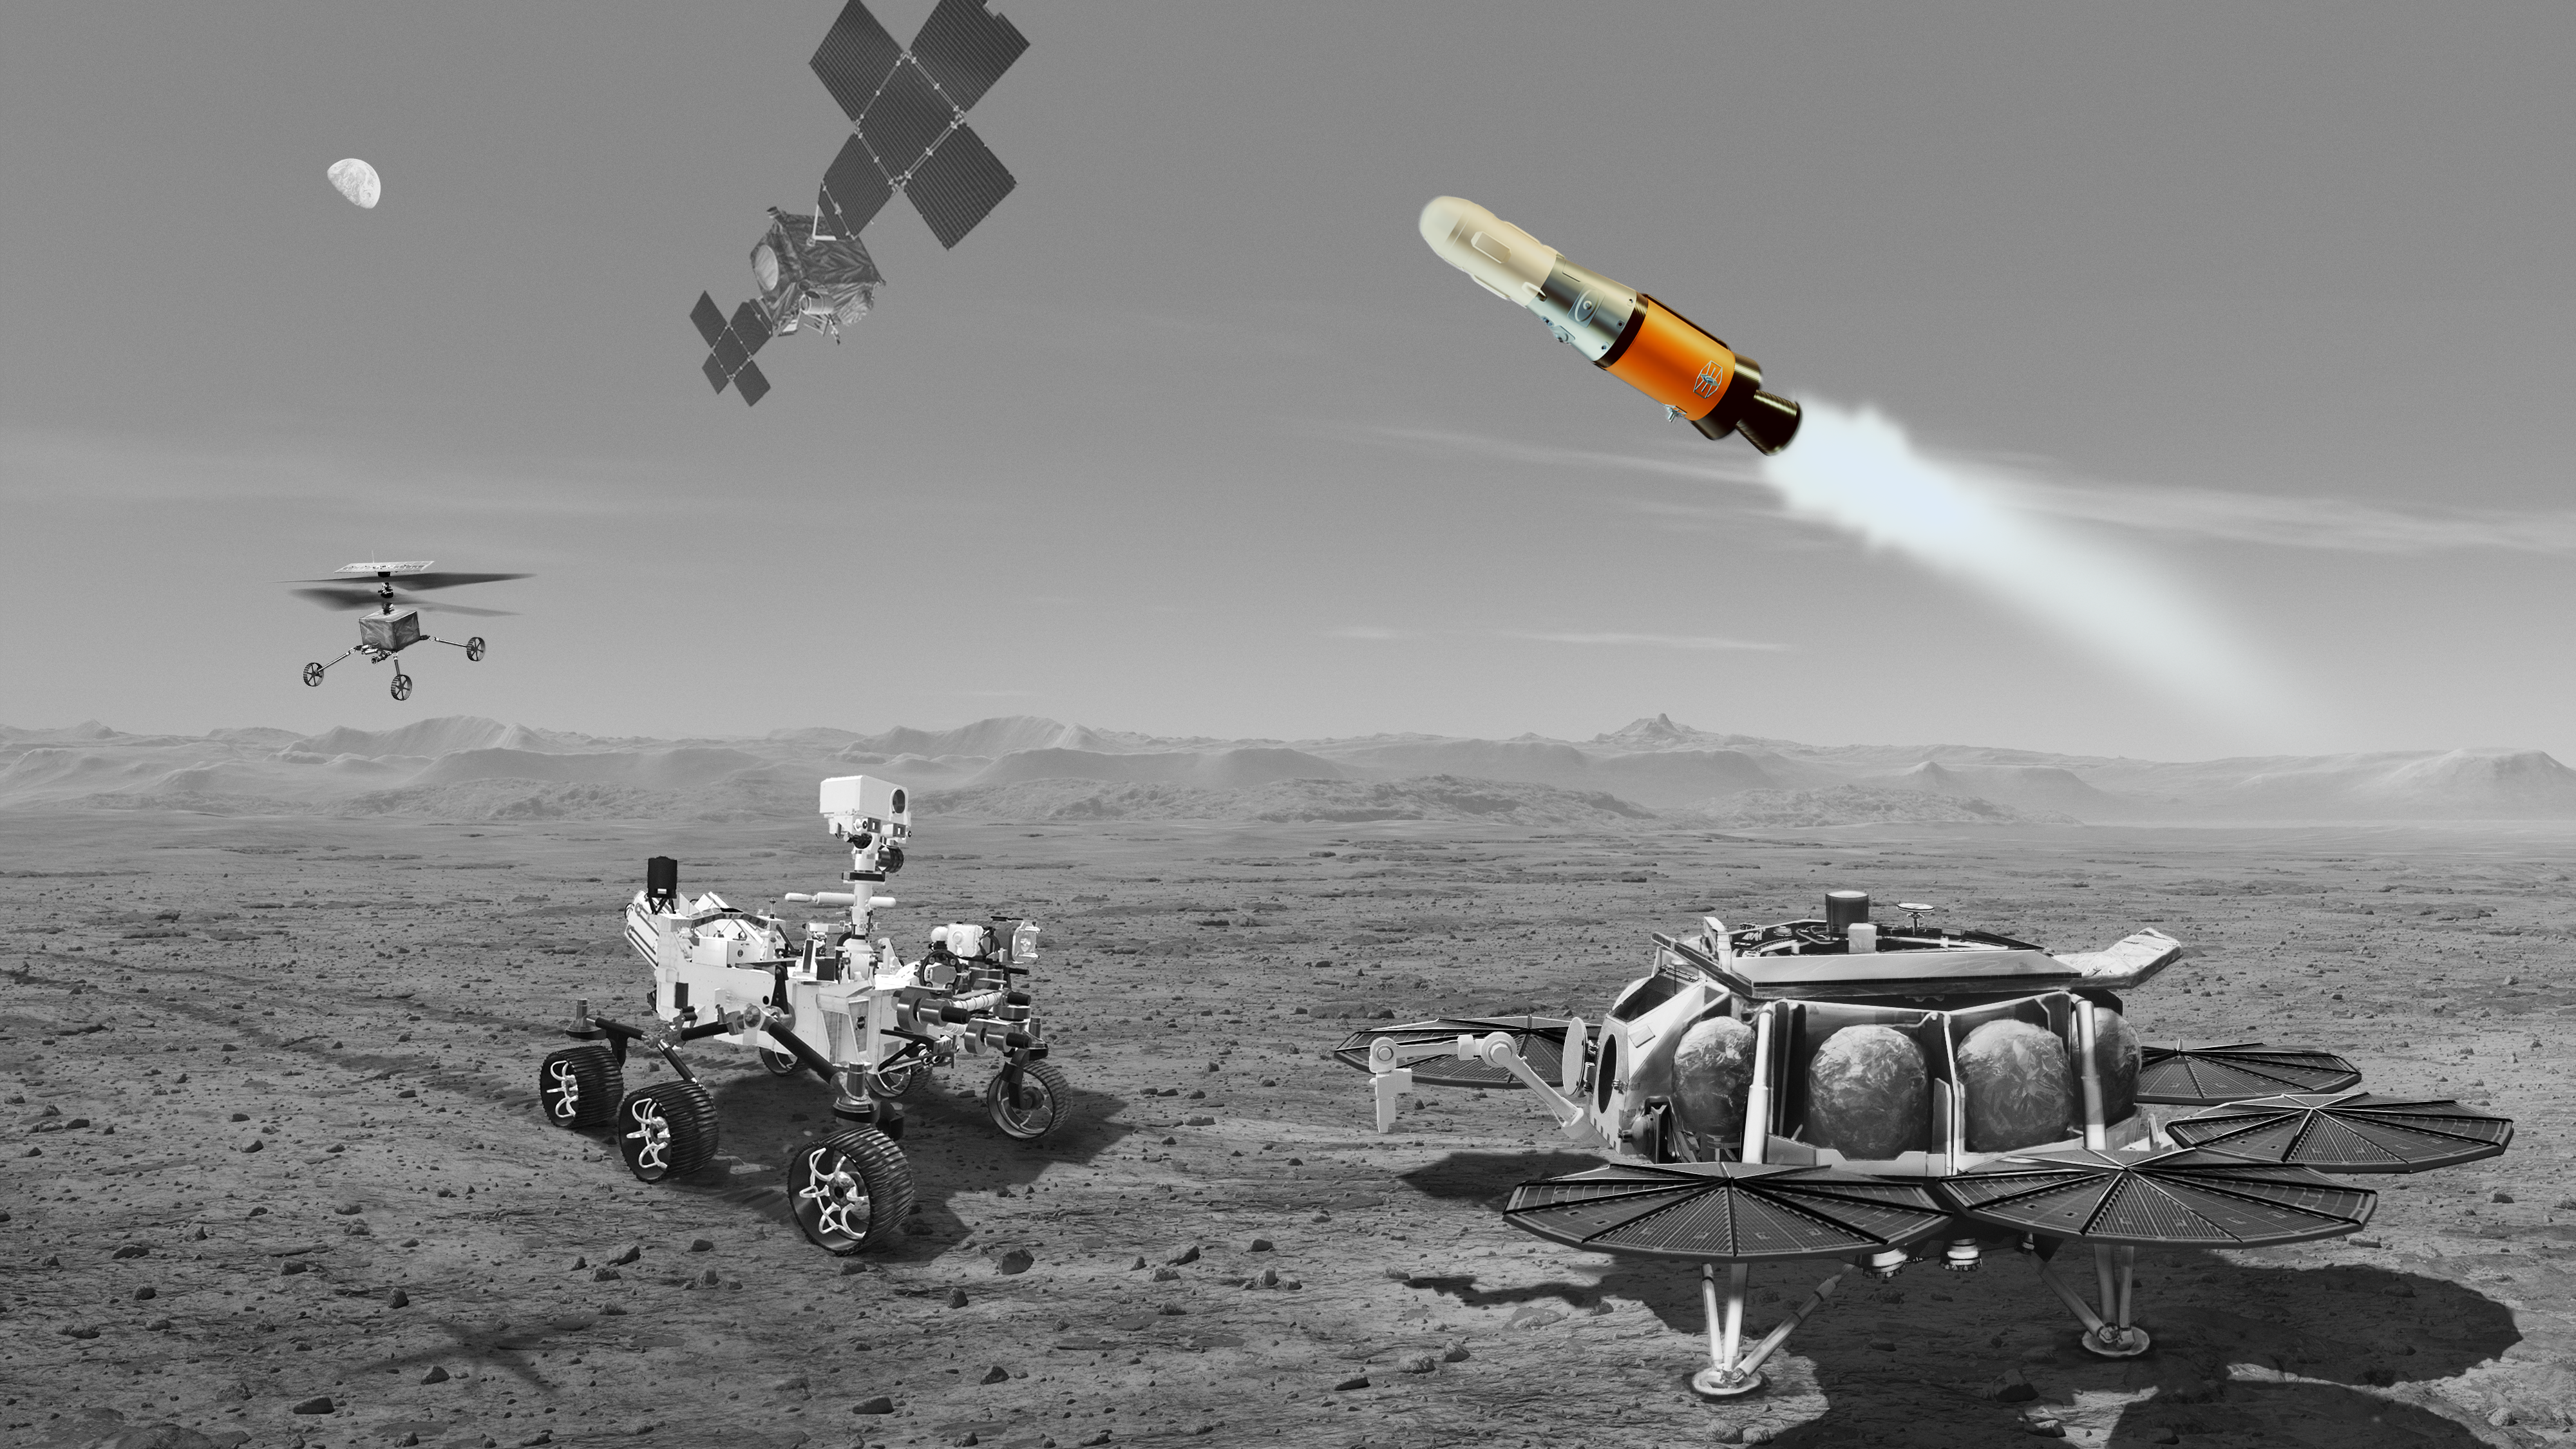 Artist's concept of all five vehicles in the Mars Sample Return mission, a rover, a lander, an orbiter, a helicopter and a rocket. The rocket is highlighted in this image.